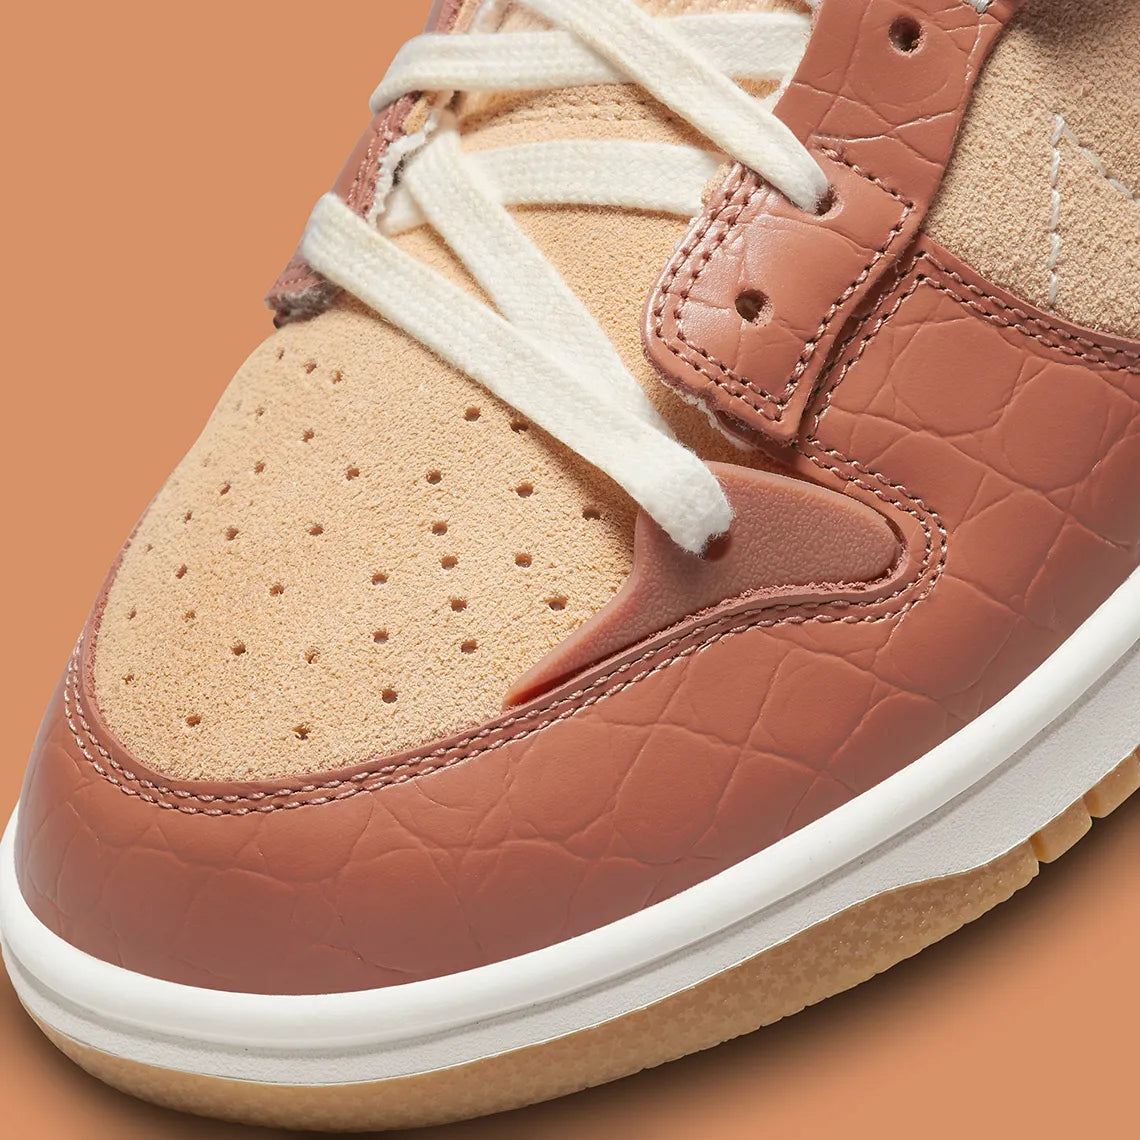 Nike Dunk Low Disrupt 2 SE Mineral Clay